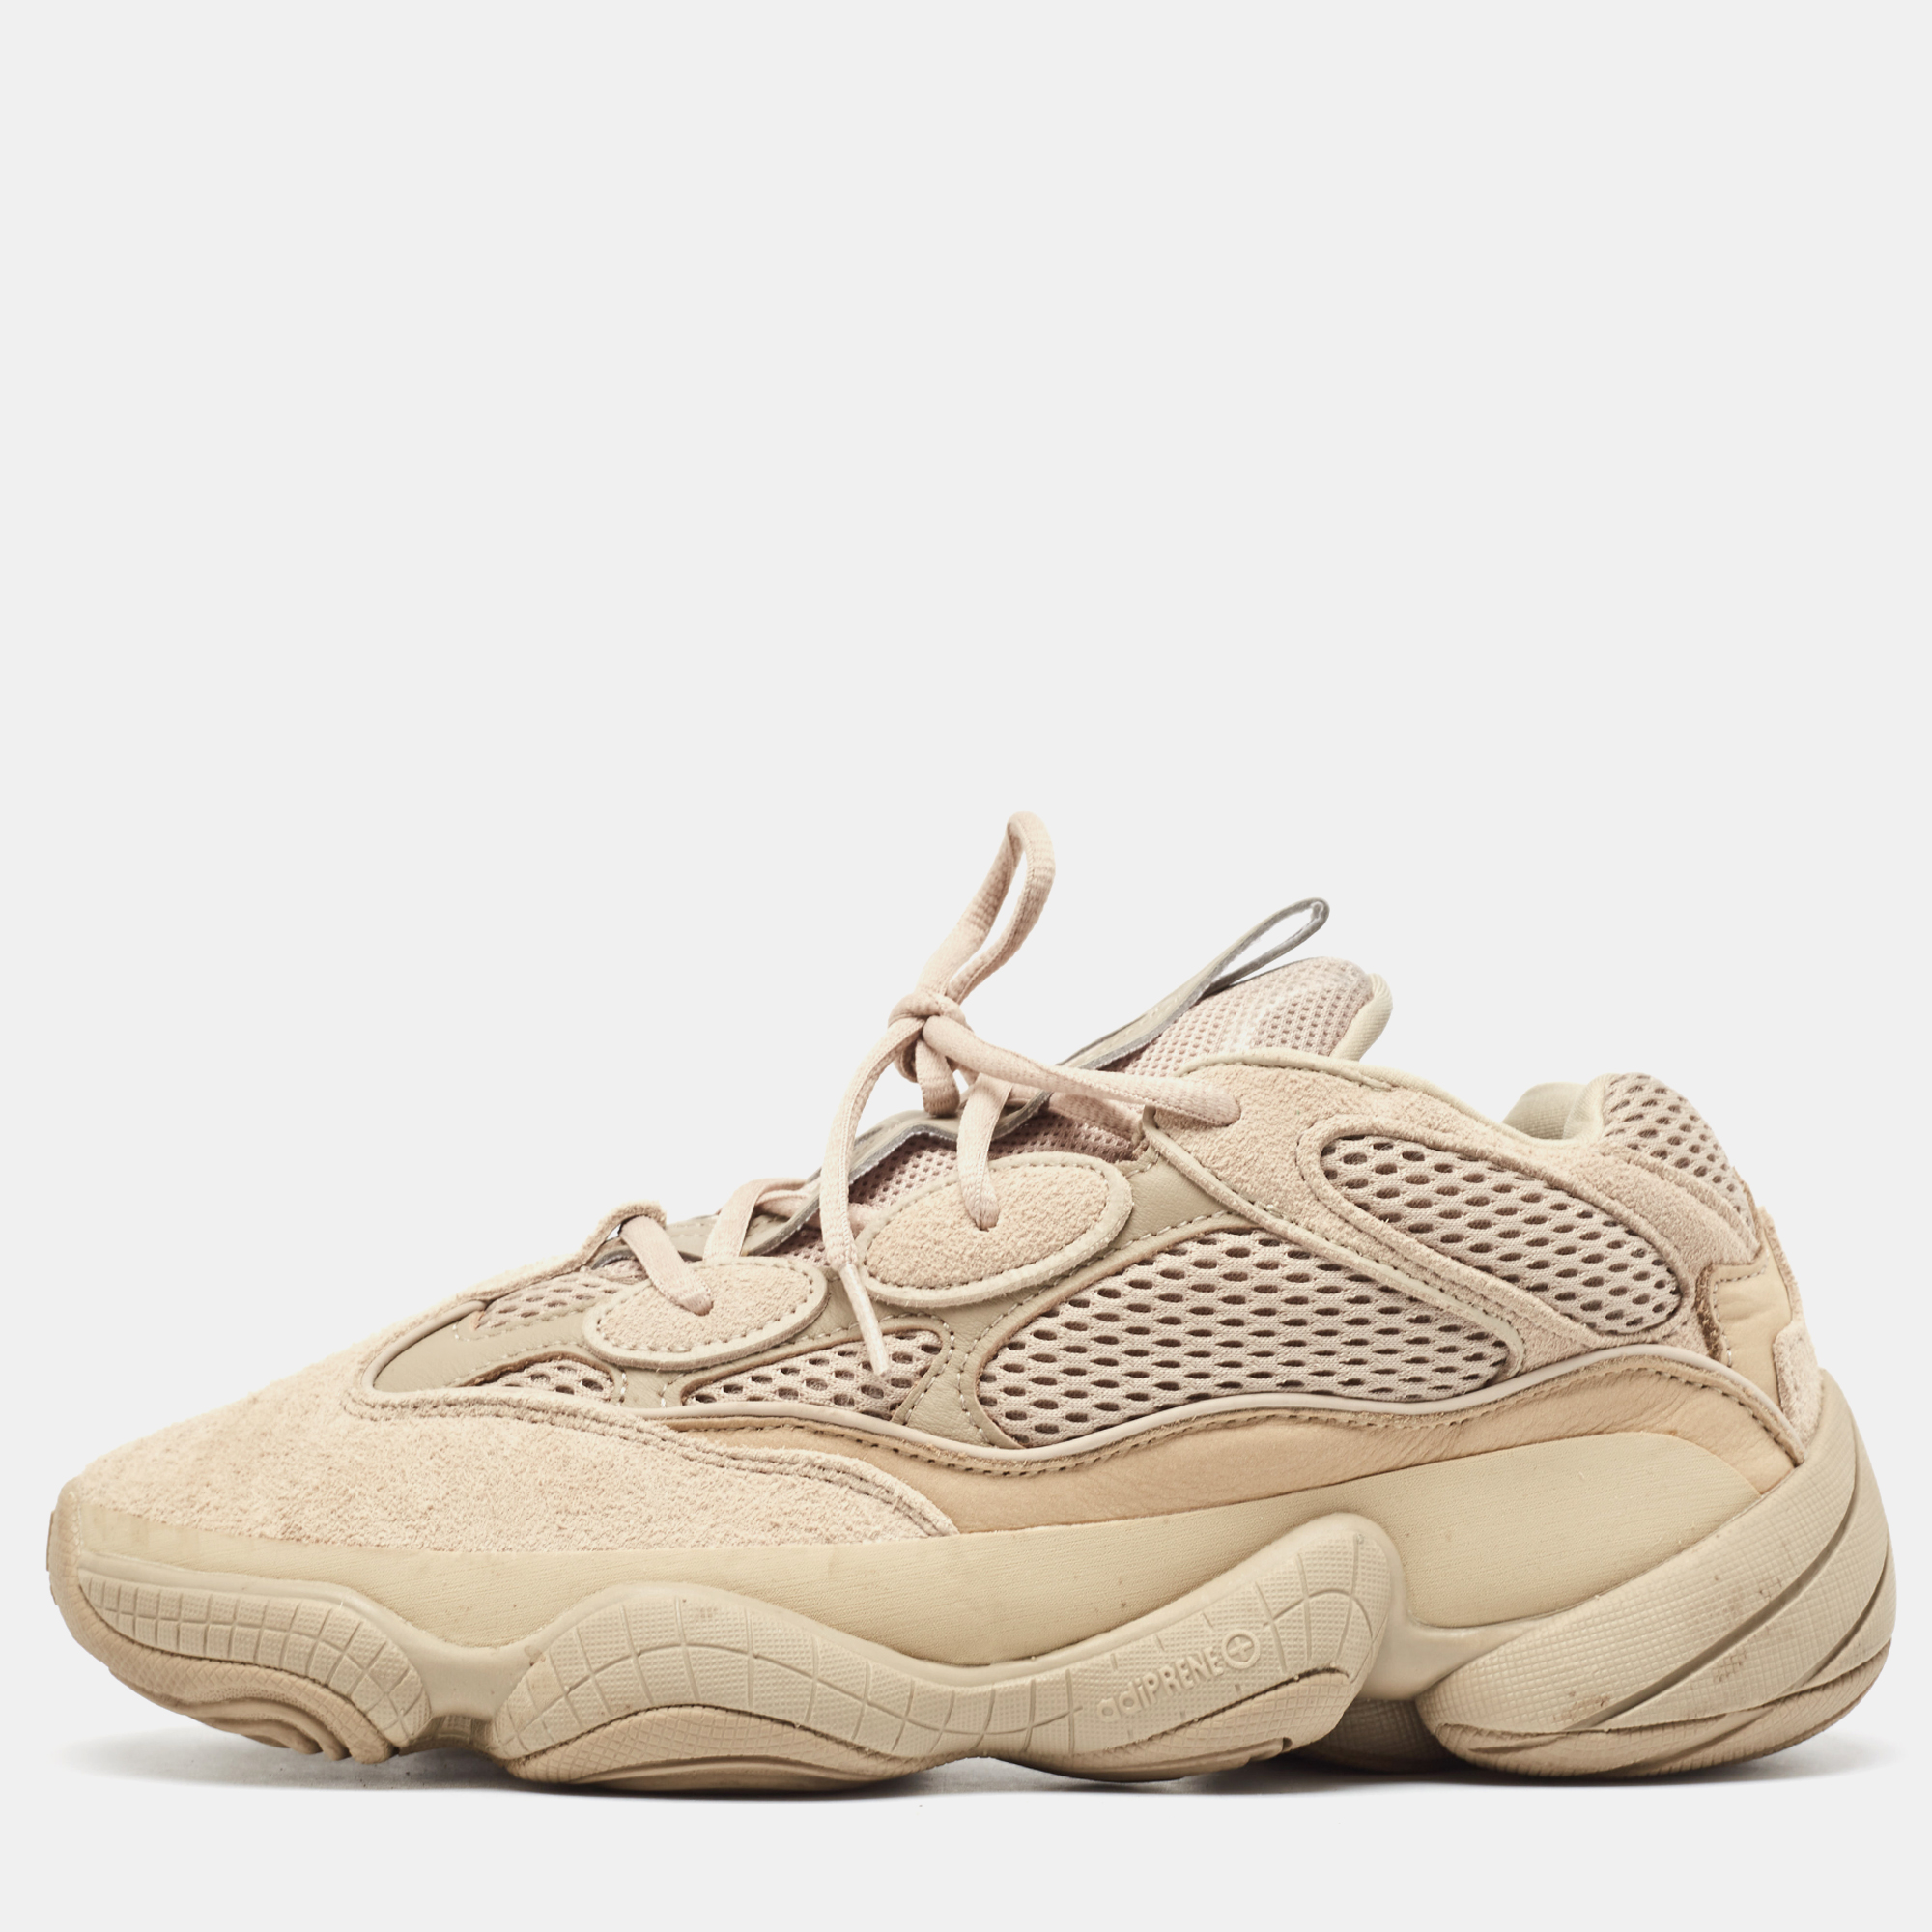 

Yeezy x Adidas Light Brown Suede and Mesh Yeezy 500 Taupe Light Sneakers Size 43 1/3, Grey